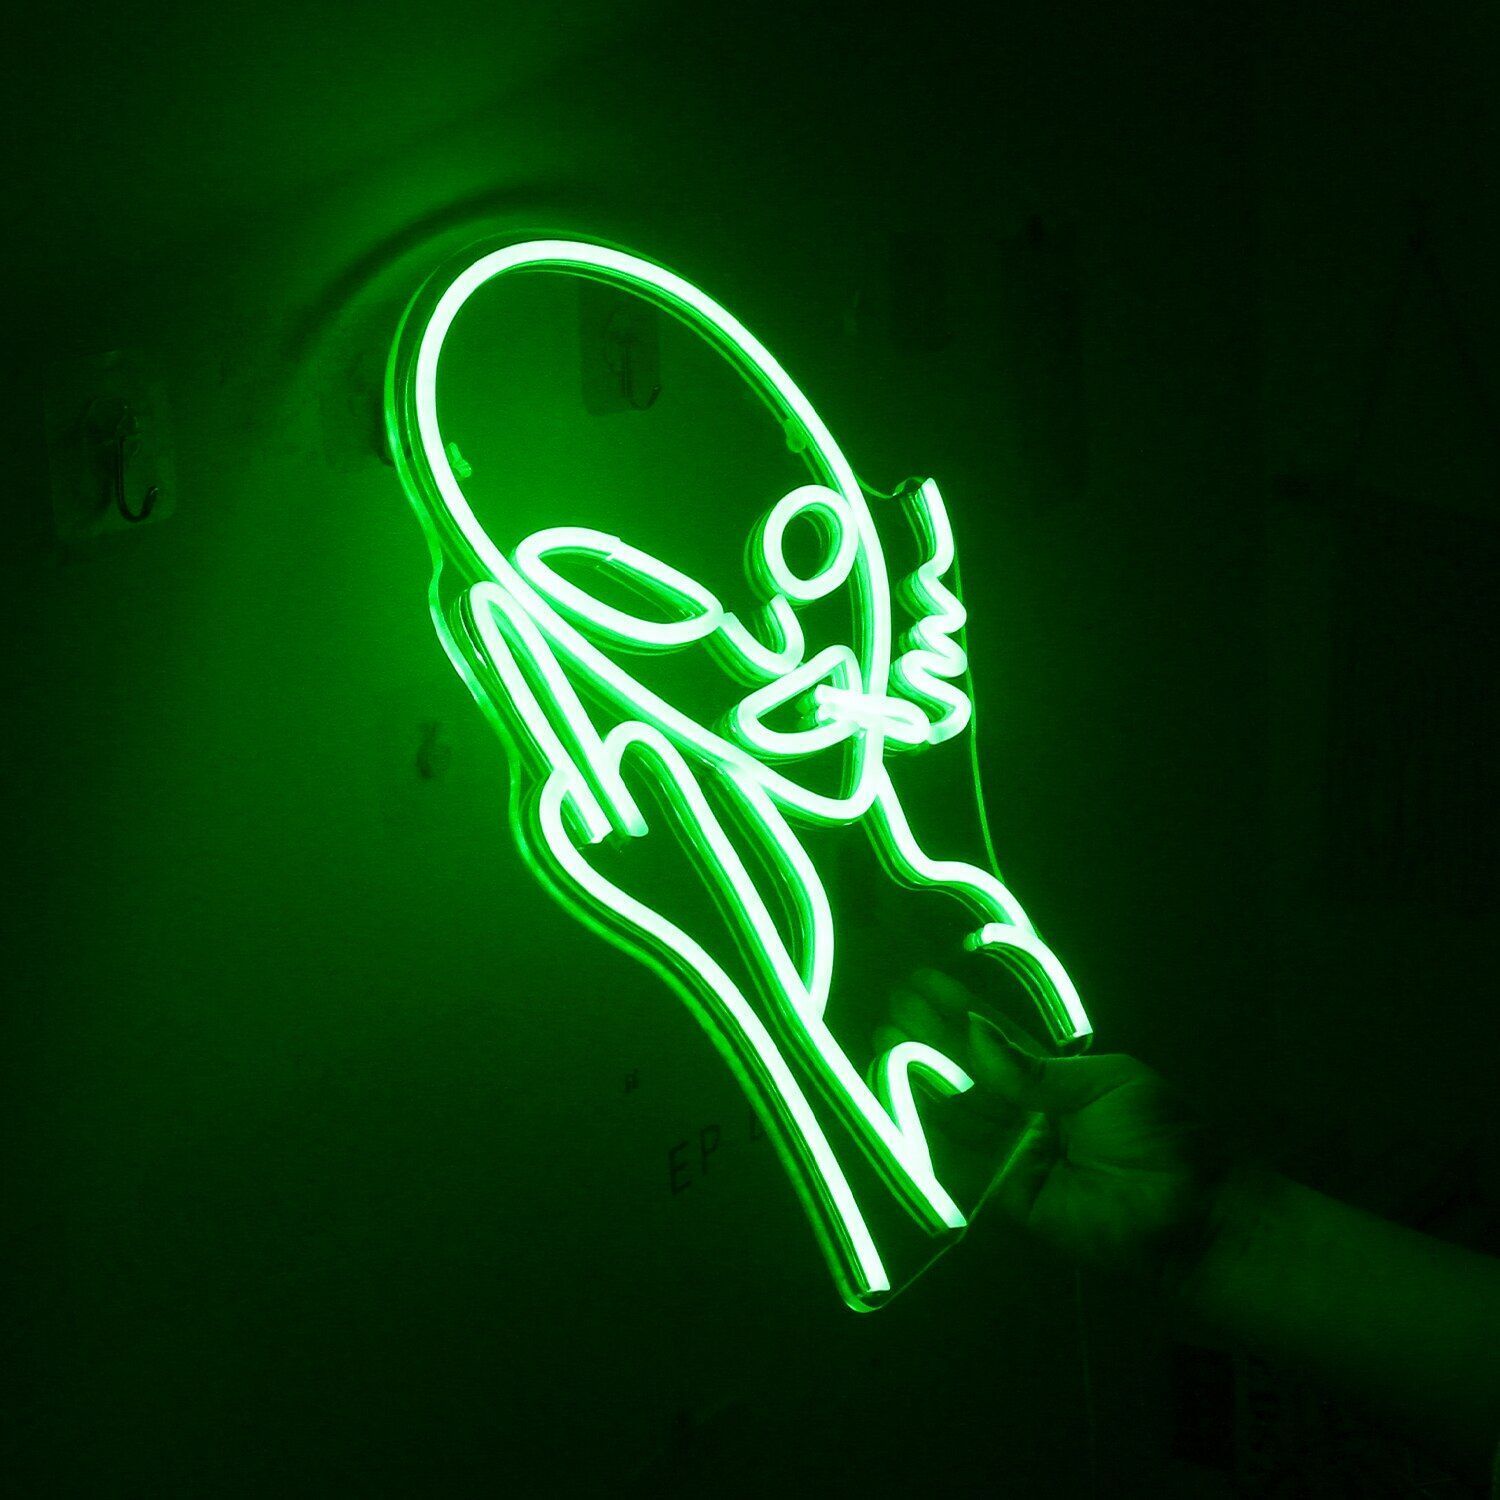 A neon sign of a shoe with a green background - Neon green